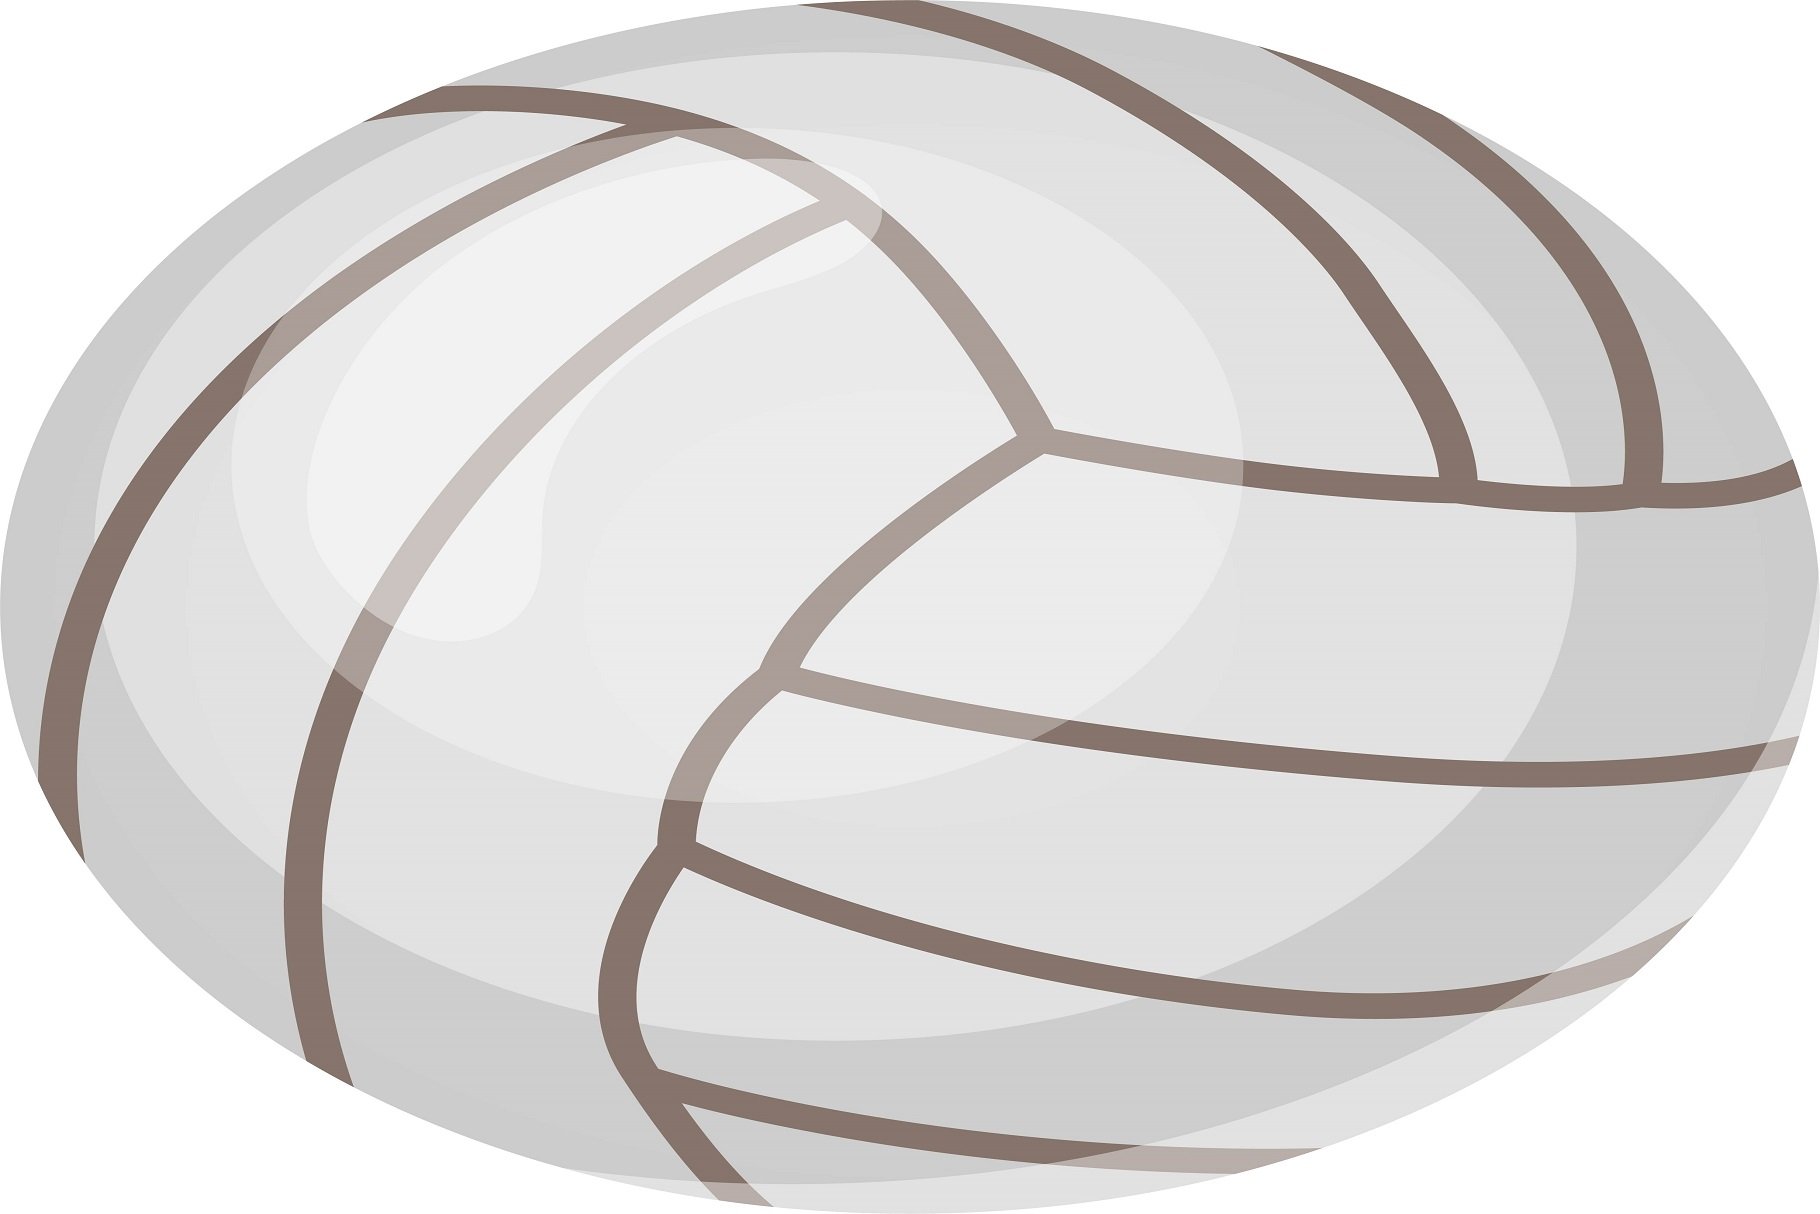 Digital Sports clipart preview image.